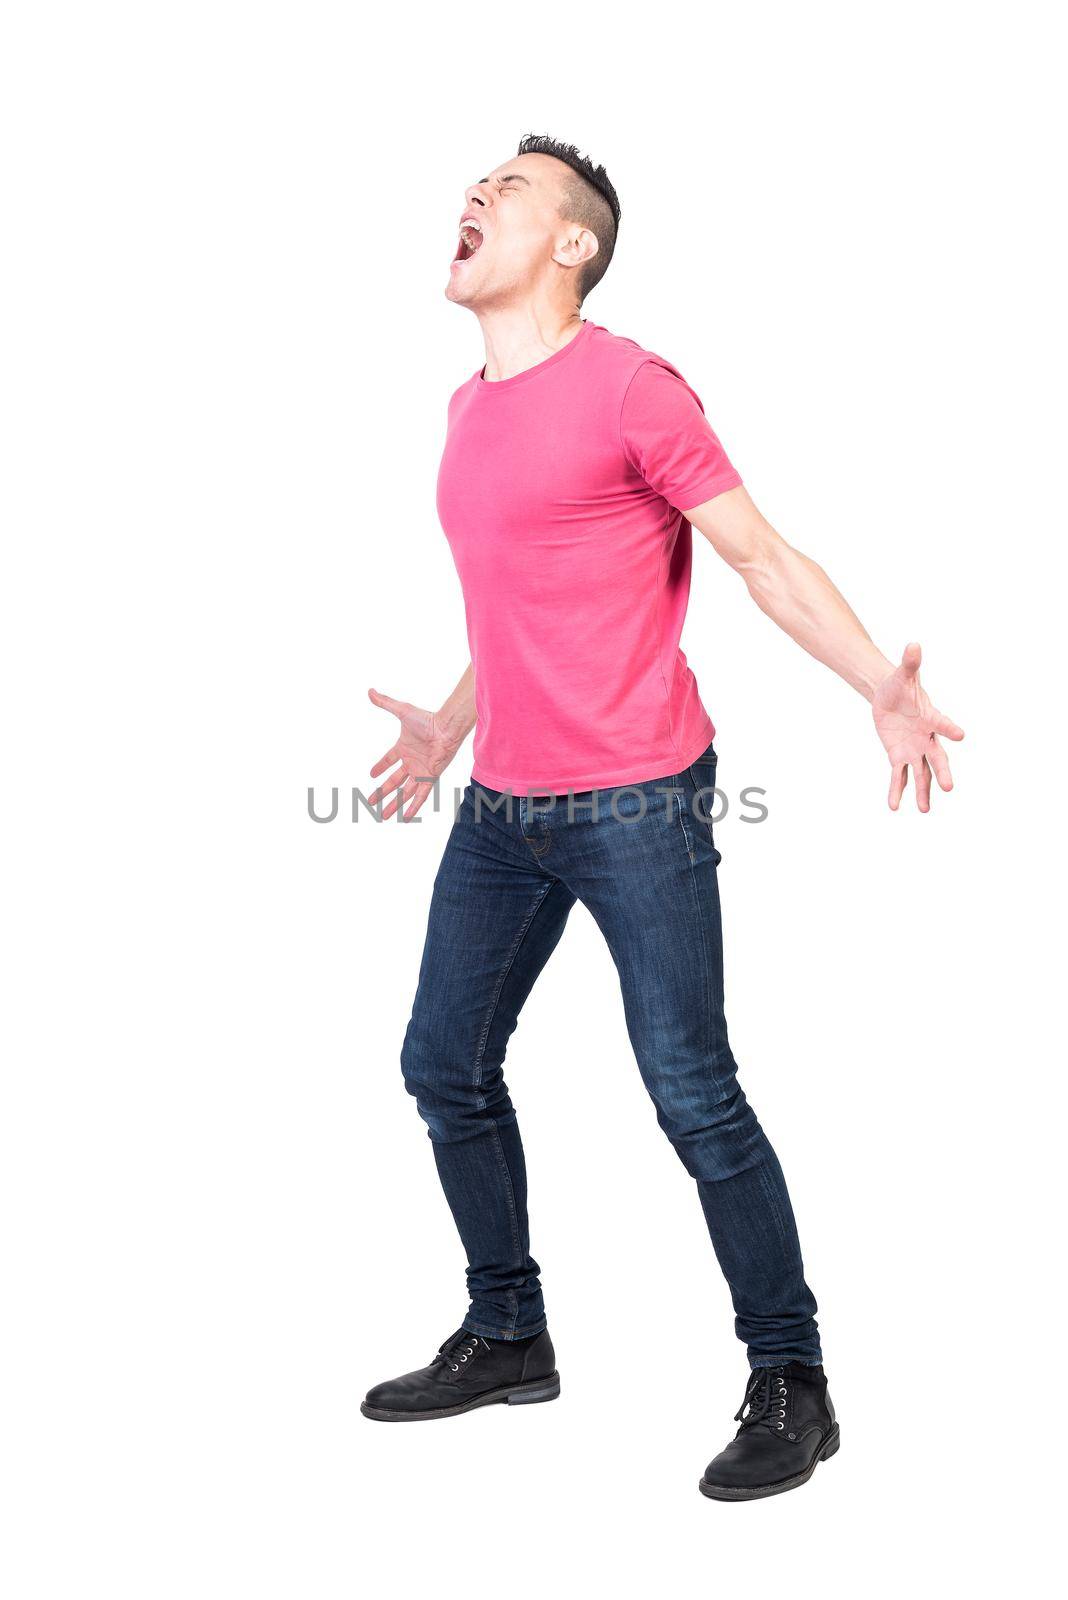 Full body of young annoyed man with dark hair in casual clothes screaming loudly with closed eyes and outstretched arms against white background